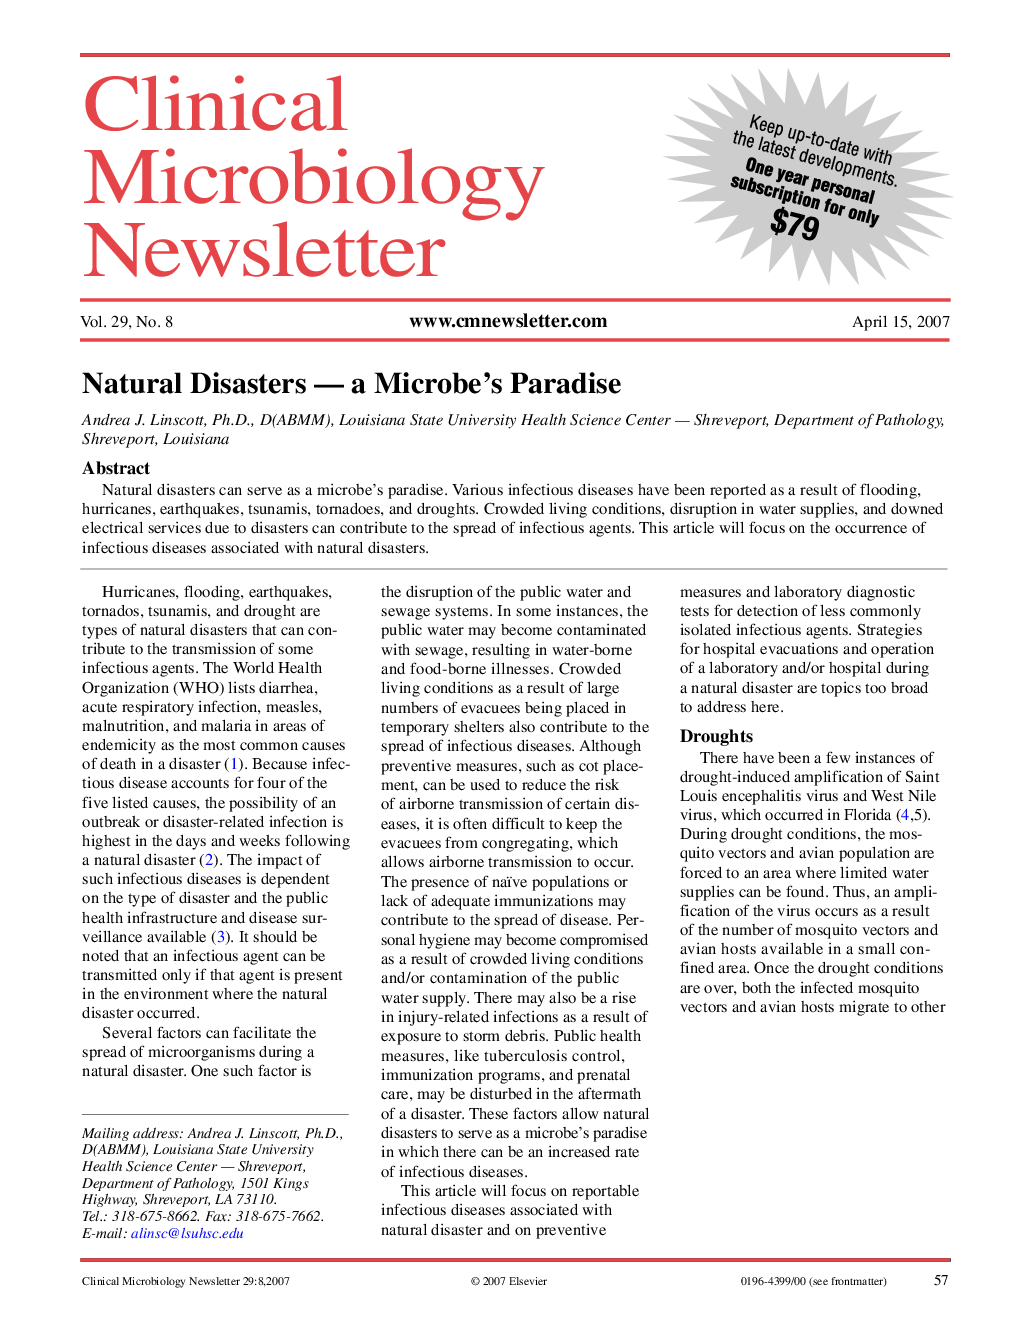 Natural disasters — a microbe's paradise